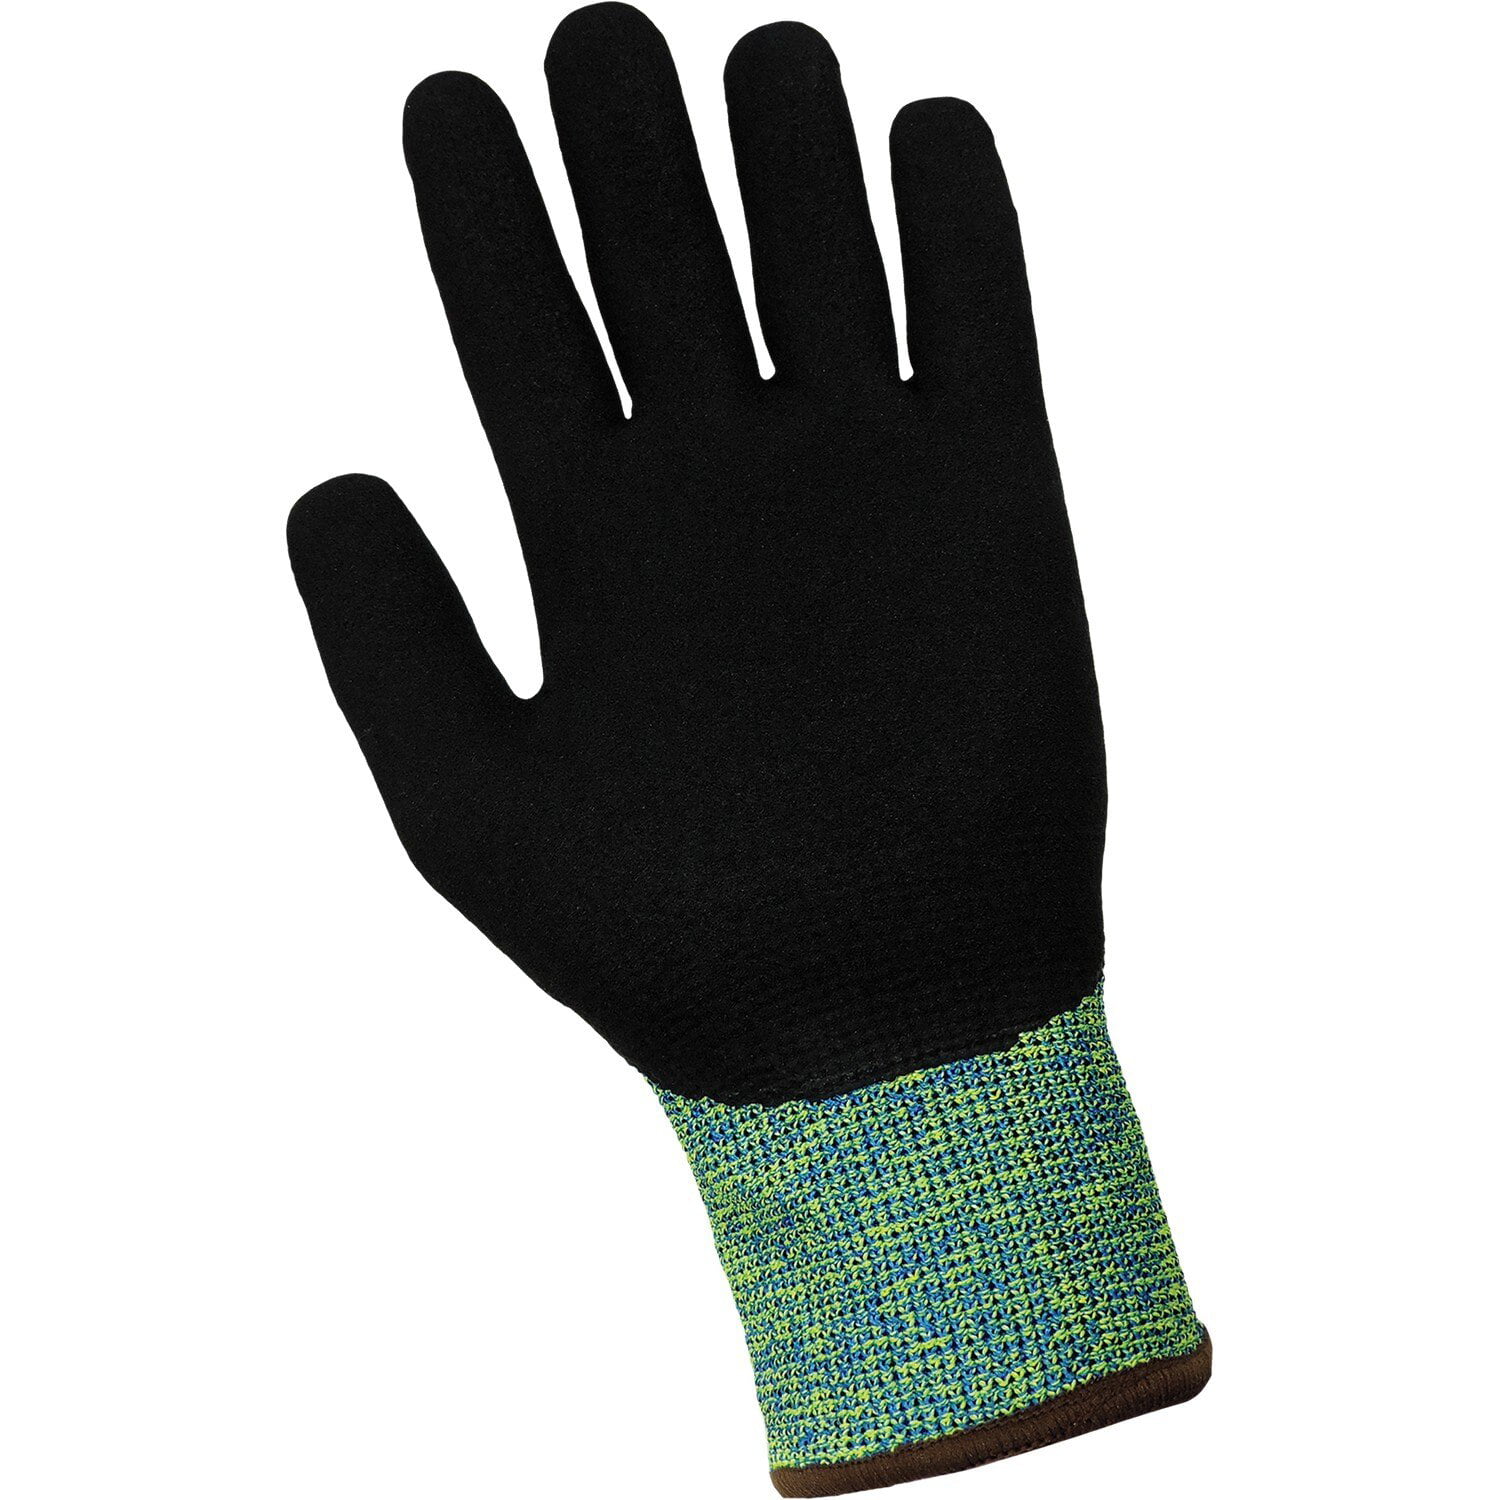 Samurai Glove Cut and Puncture Resistant Gloves Size X-Large 